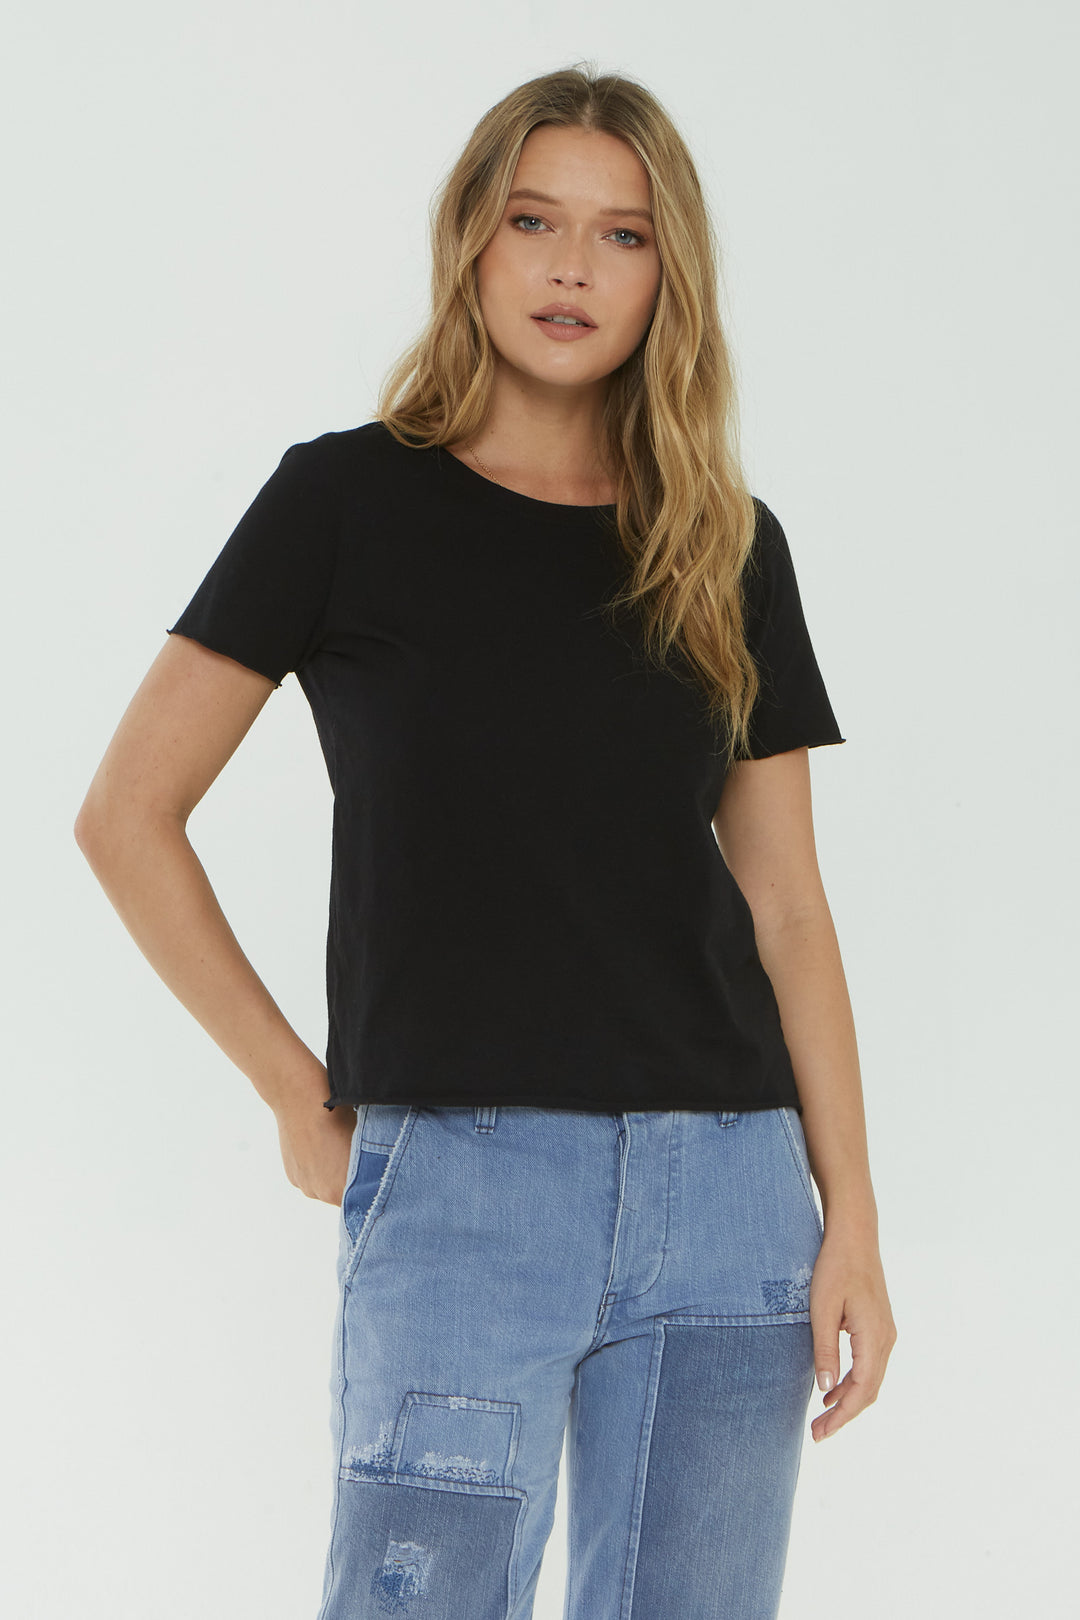 RAW EDGE TEE - Kingfisher Road - Online Boutique